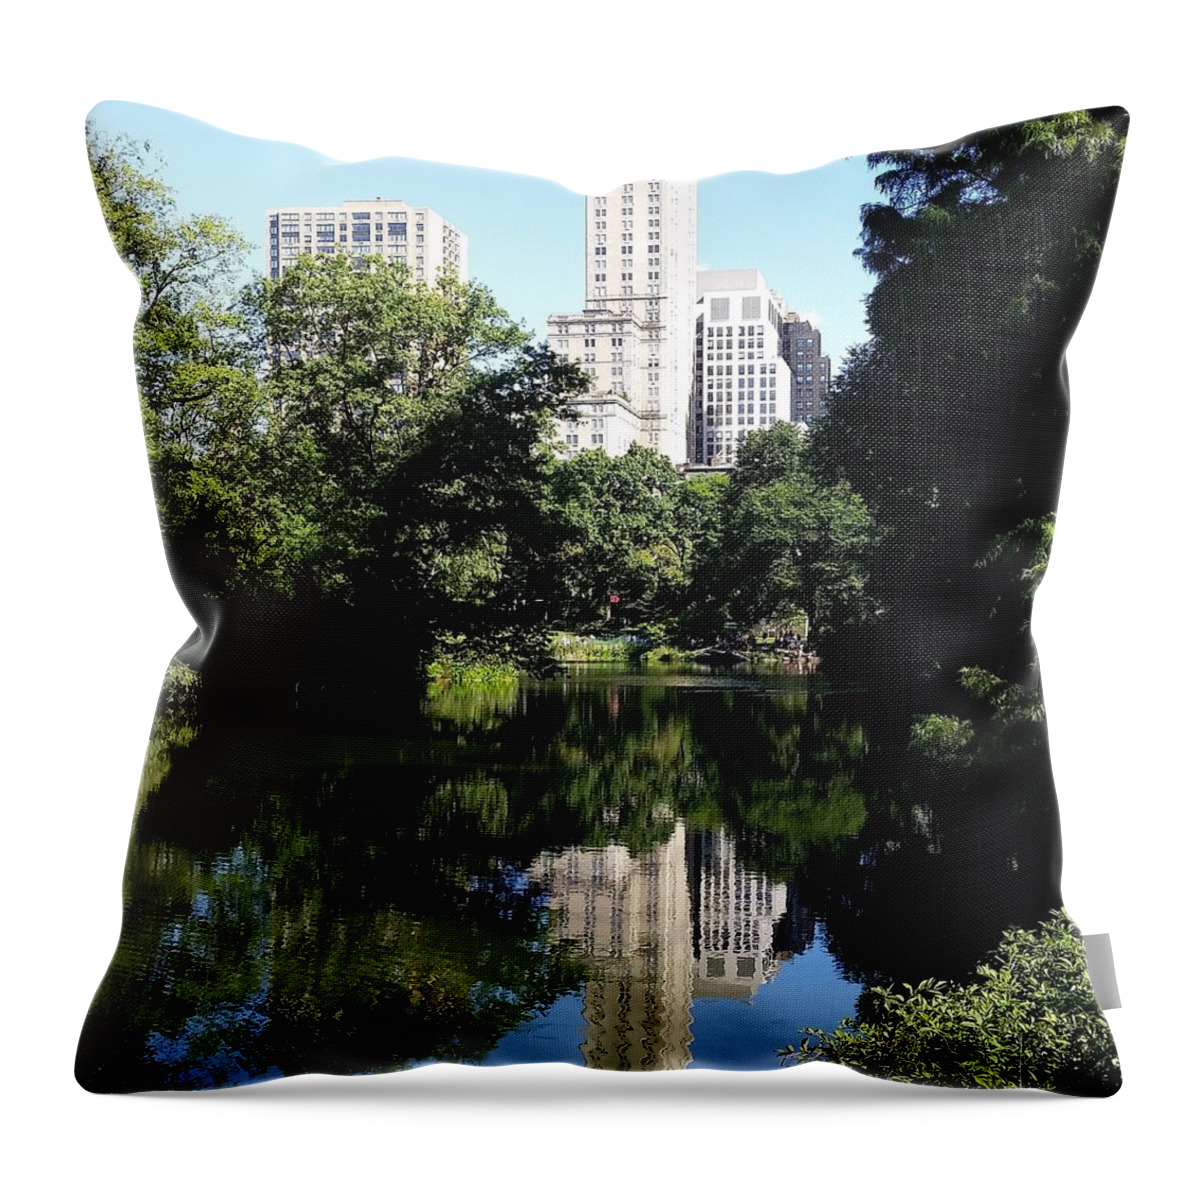 Skyscraper Throw Pillow featuring the photograph Skyscraper Reflection by Vic Ritchey